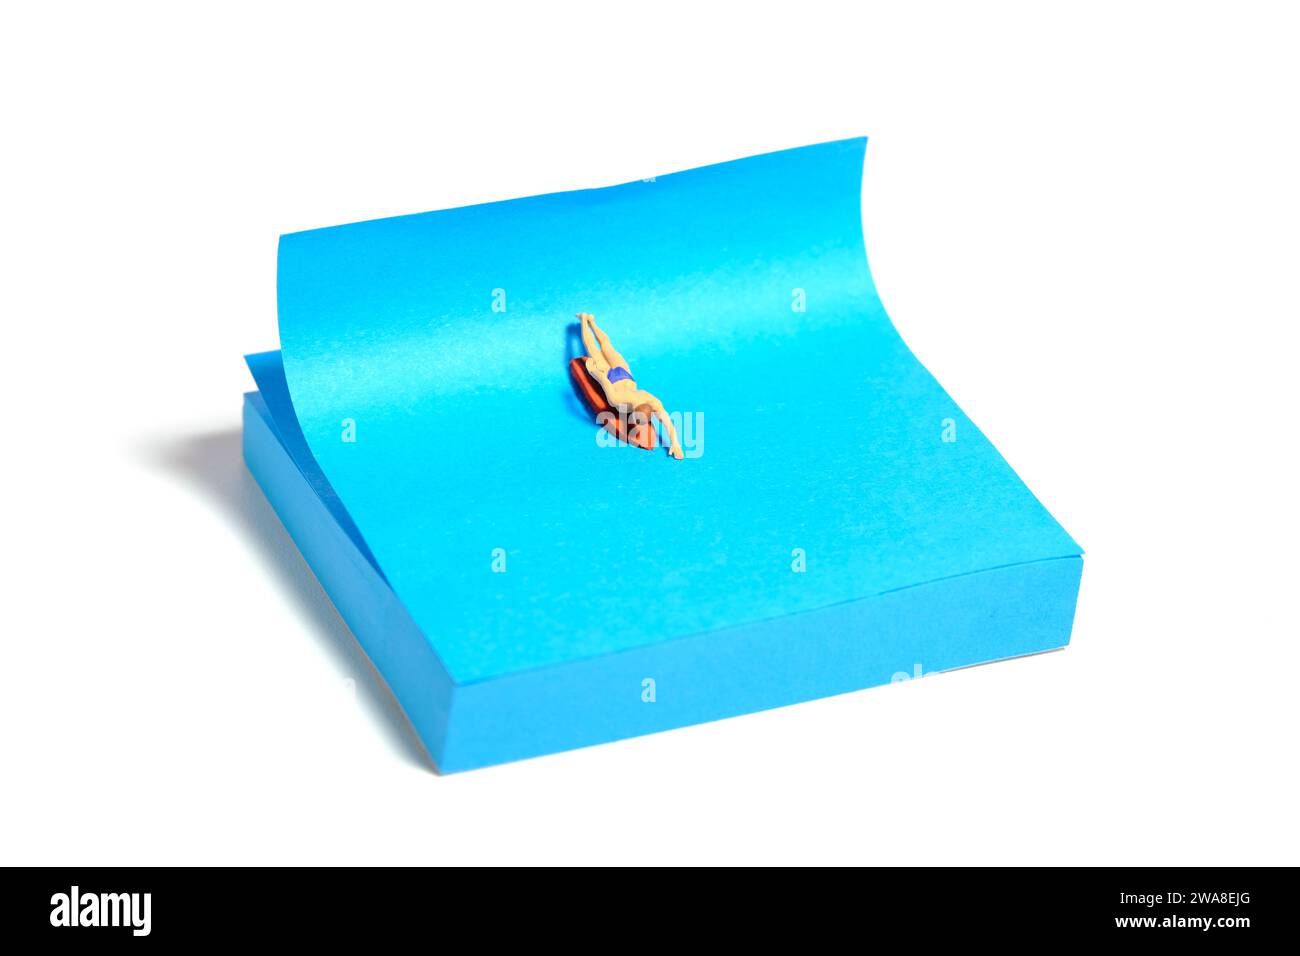 Creative miniature people toy figure photography. Sticky notes installation. A men surfer swimming above surfing board. Isolated on white background. Stock Photo